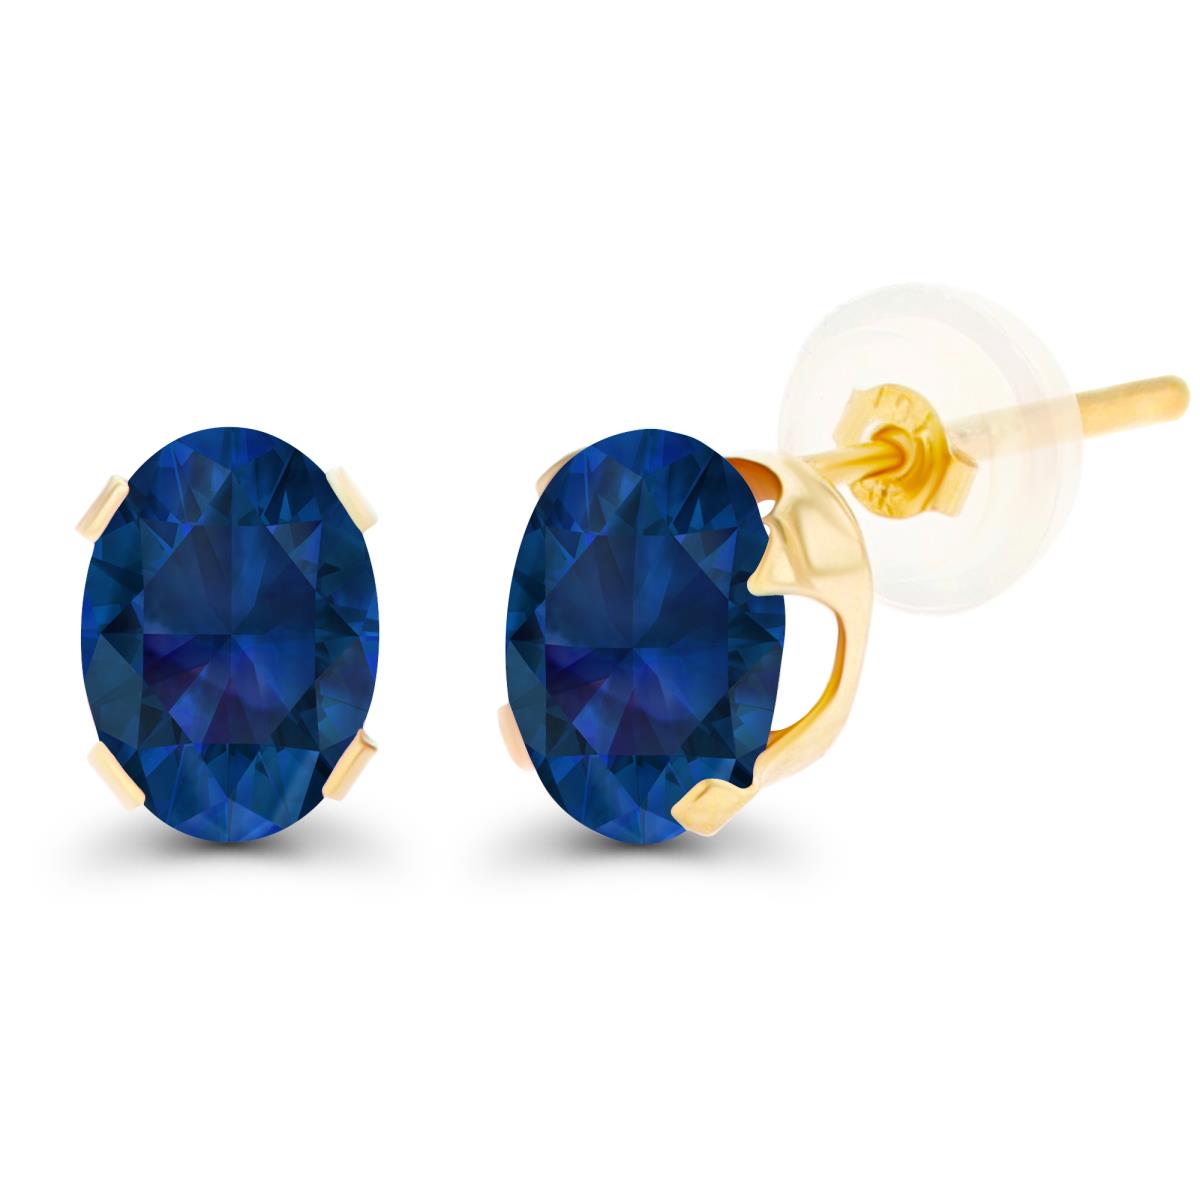 10K Yellow Gold 7x5mm Oval Cr Blue Sapphire Stud Earring with Silicone Back